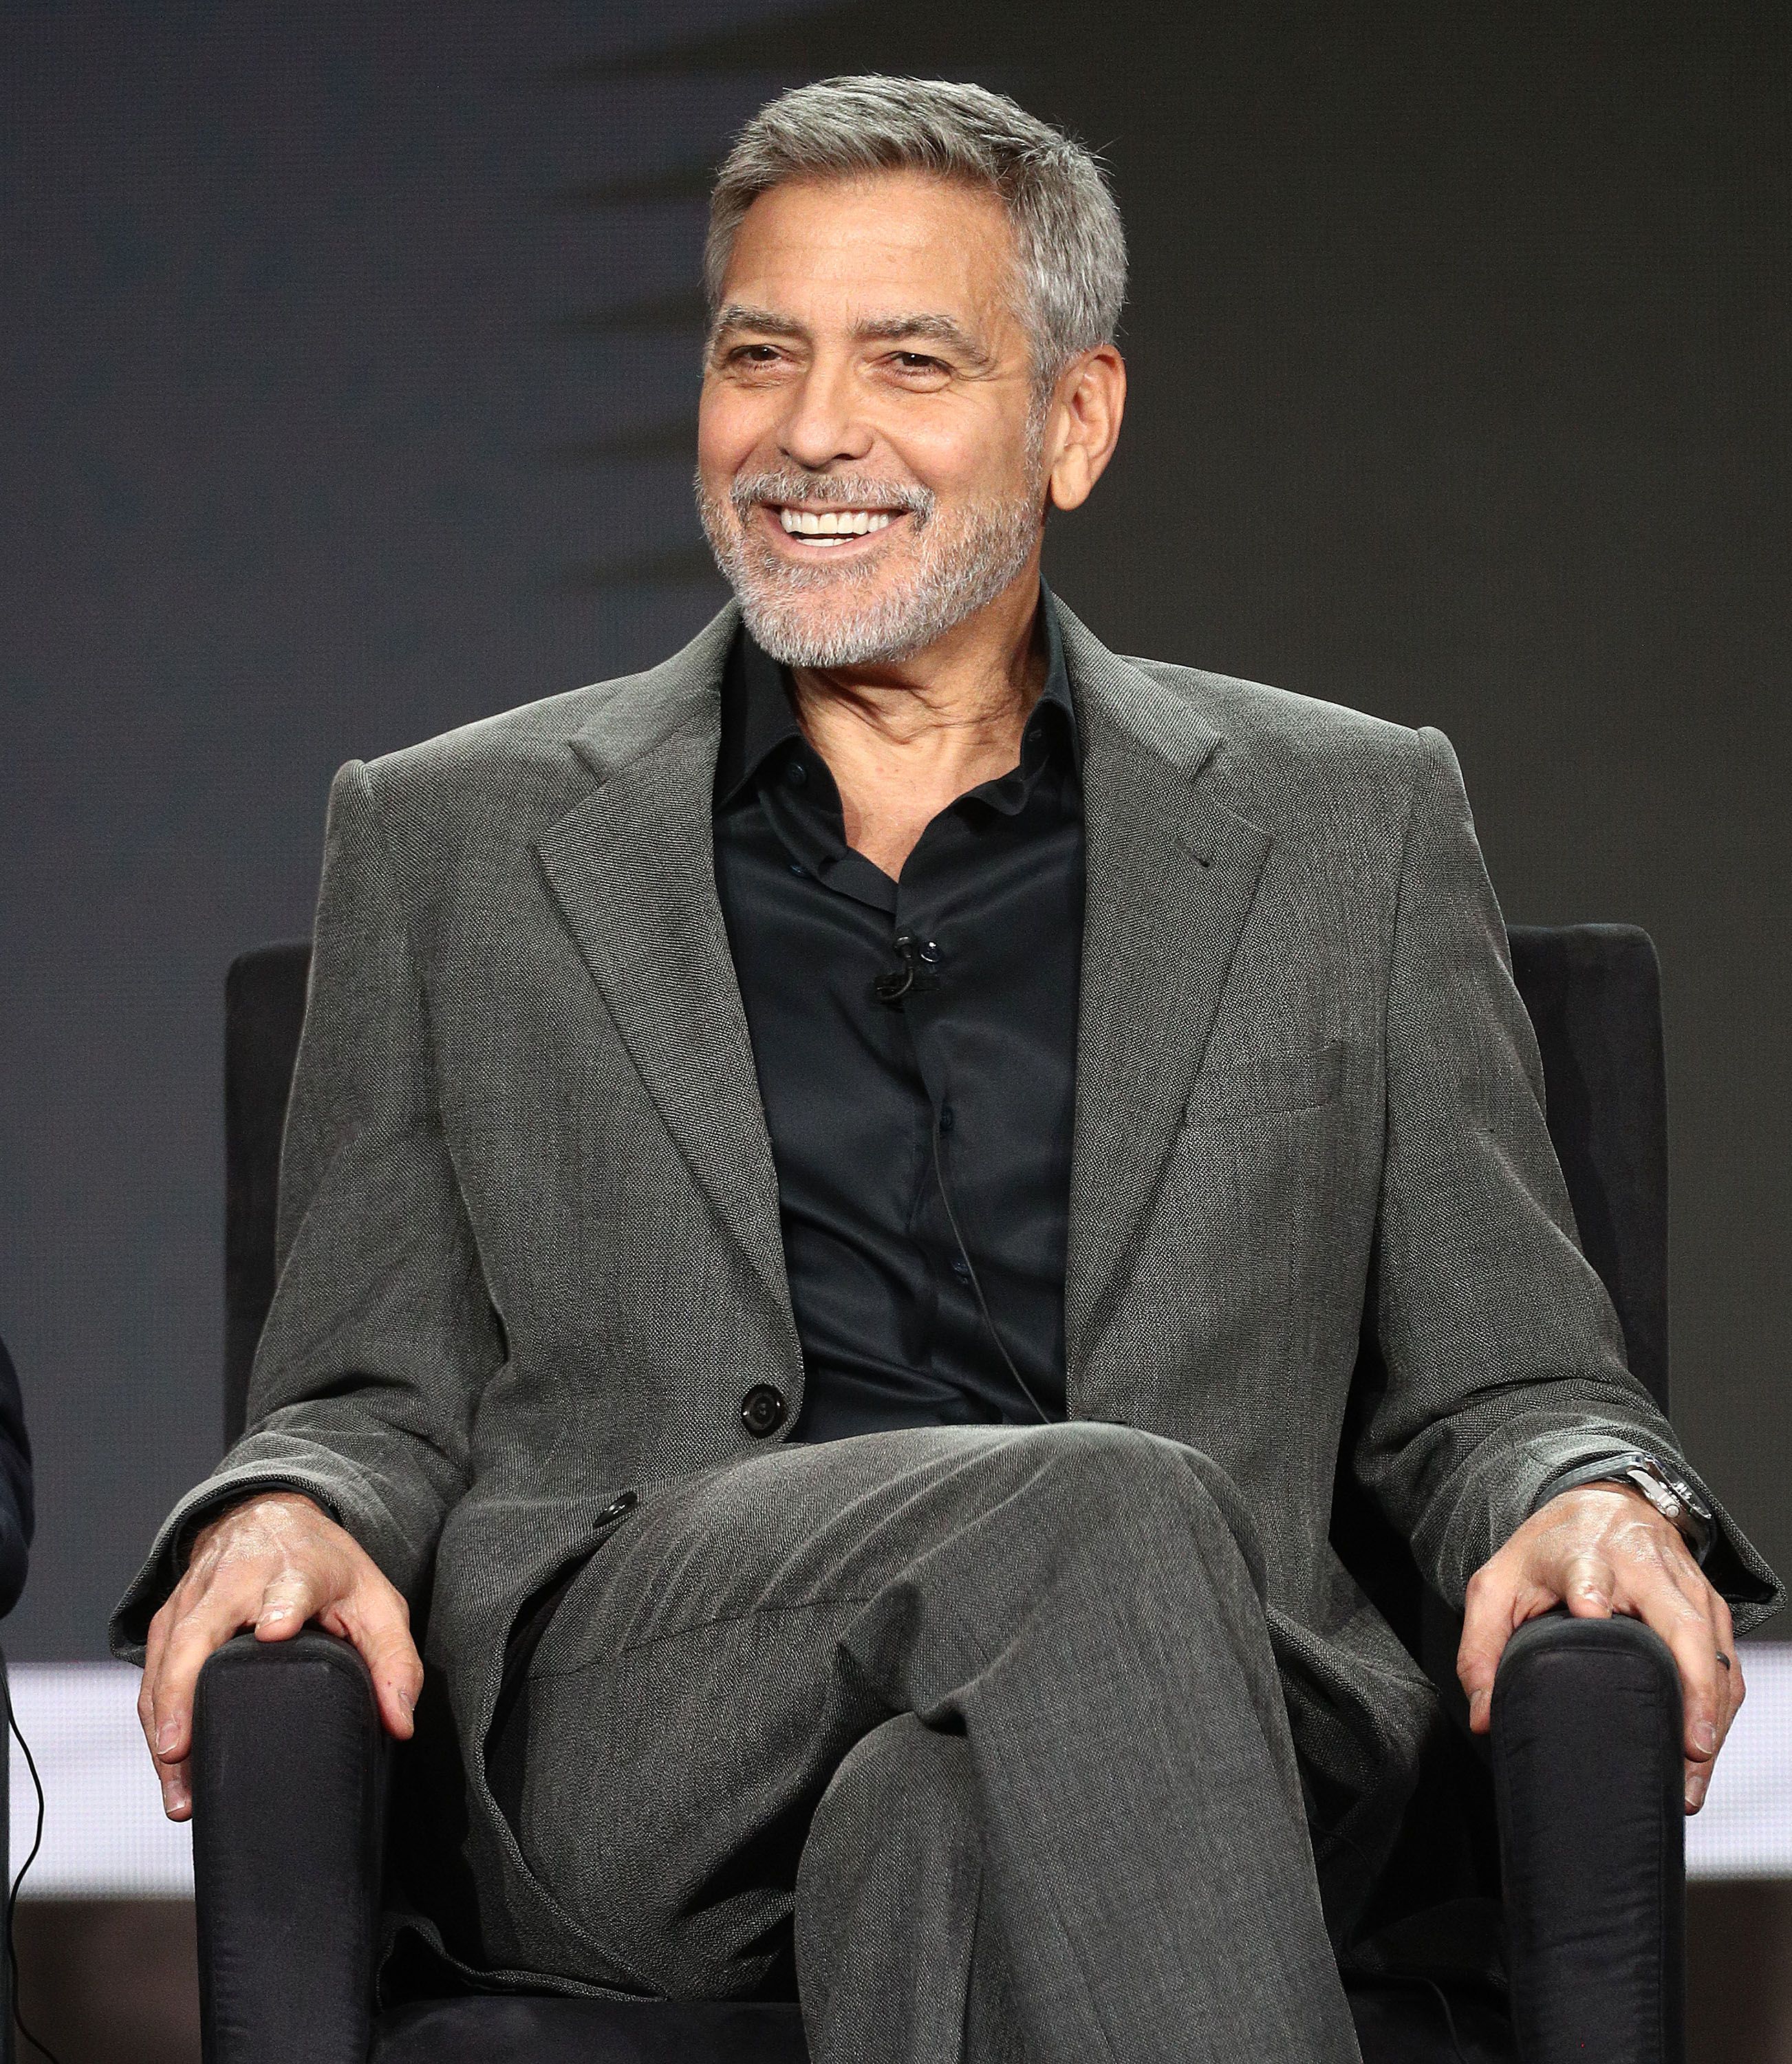 Clooney Opens up about Aging as He Prepares to Celebrate 60th